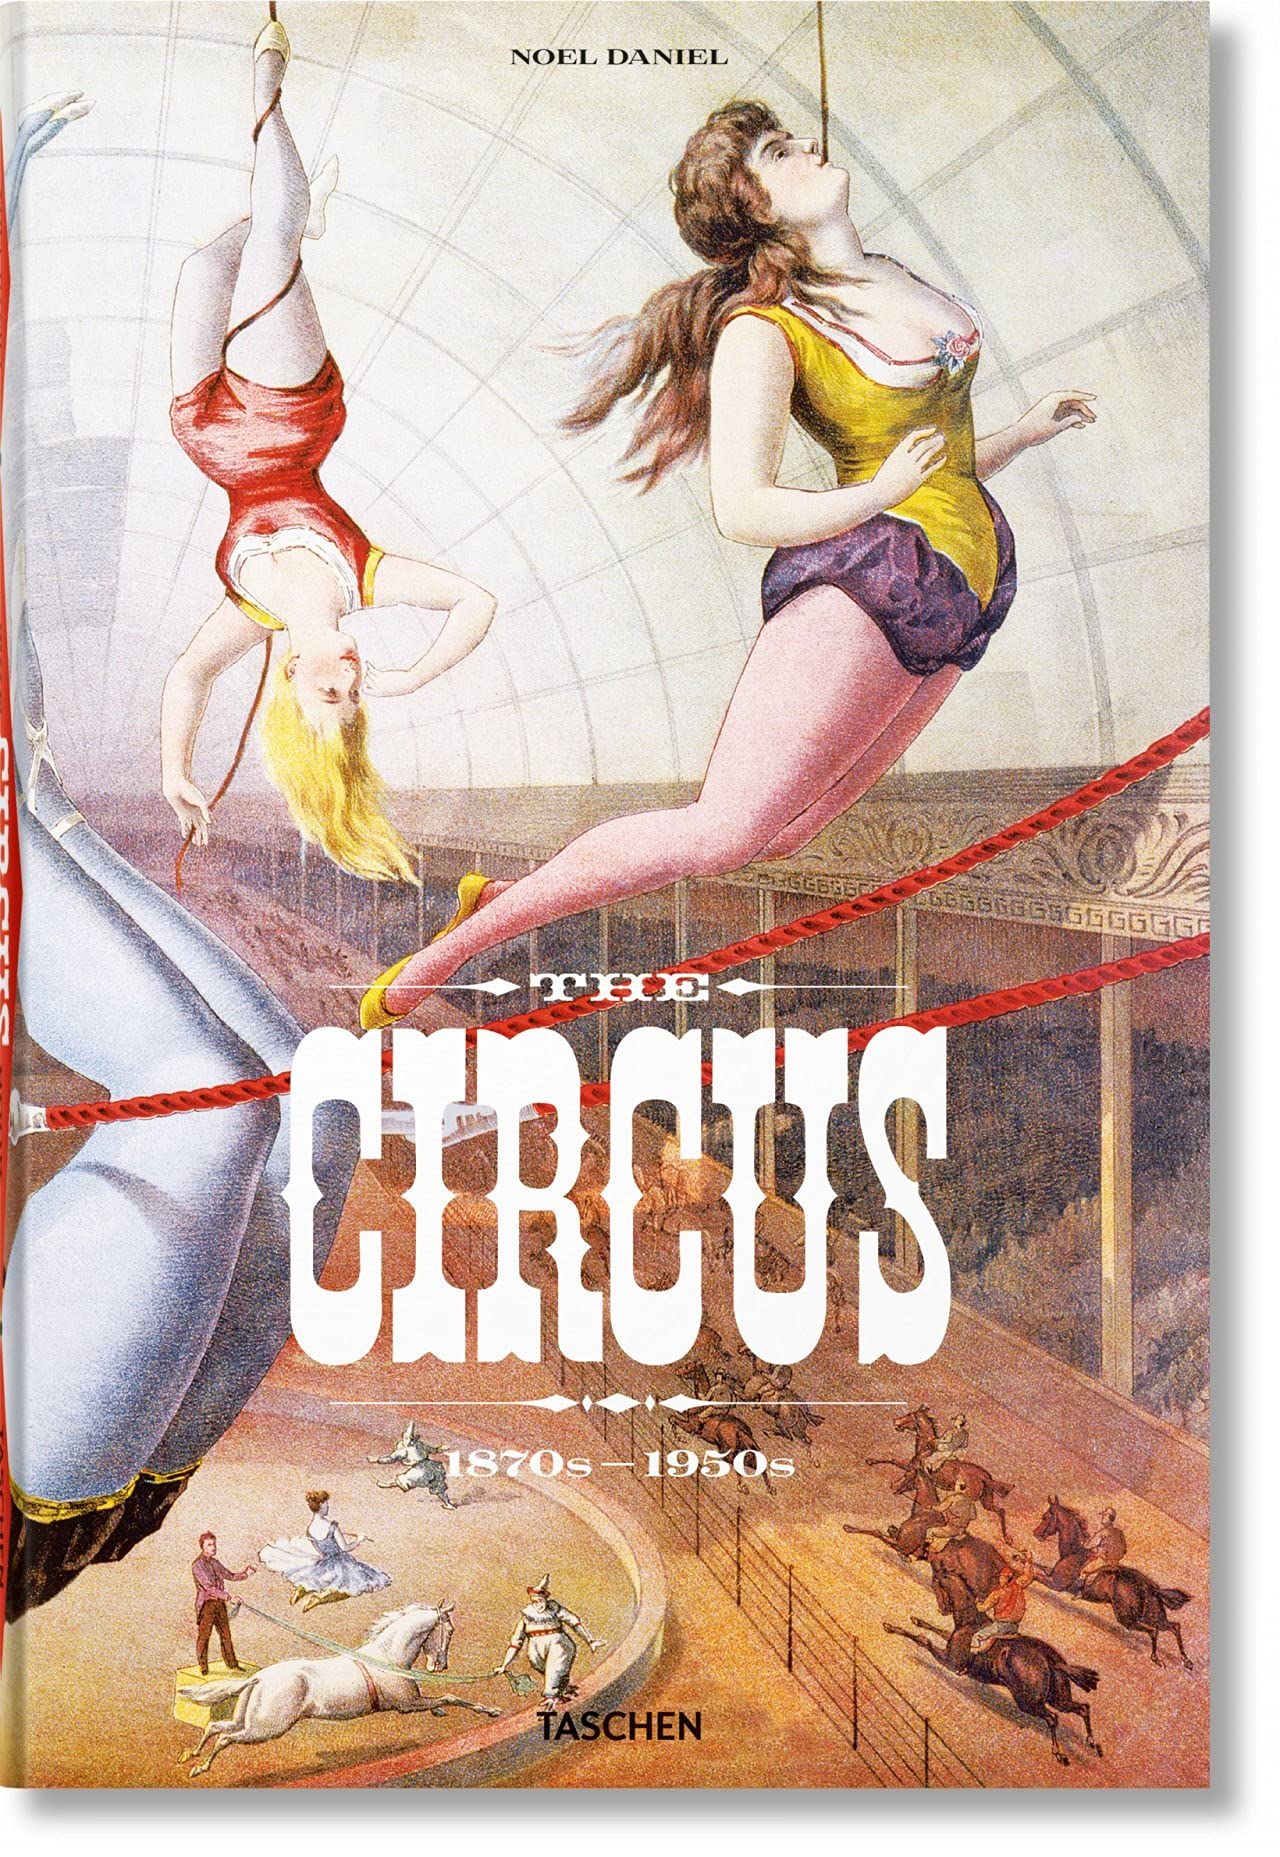 The Circus - 1870s-1950s - Multilingual Edition